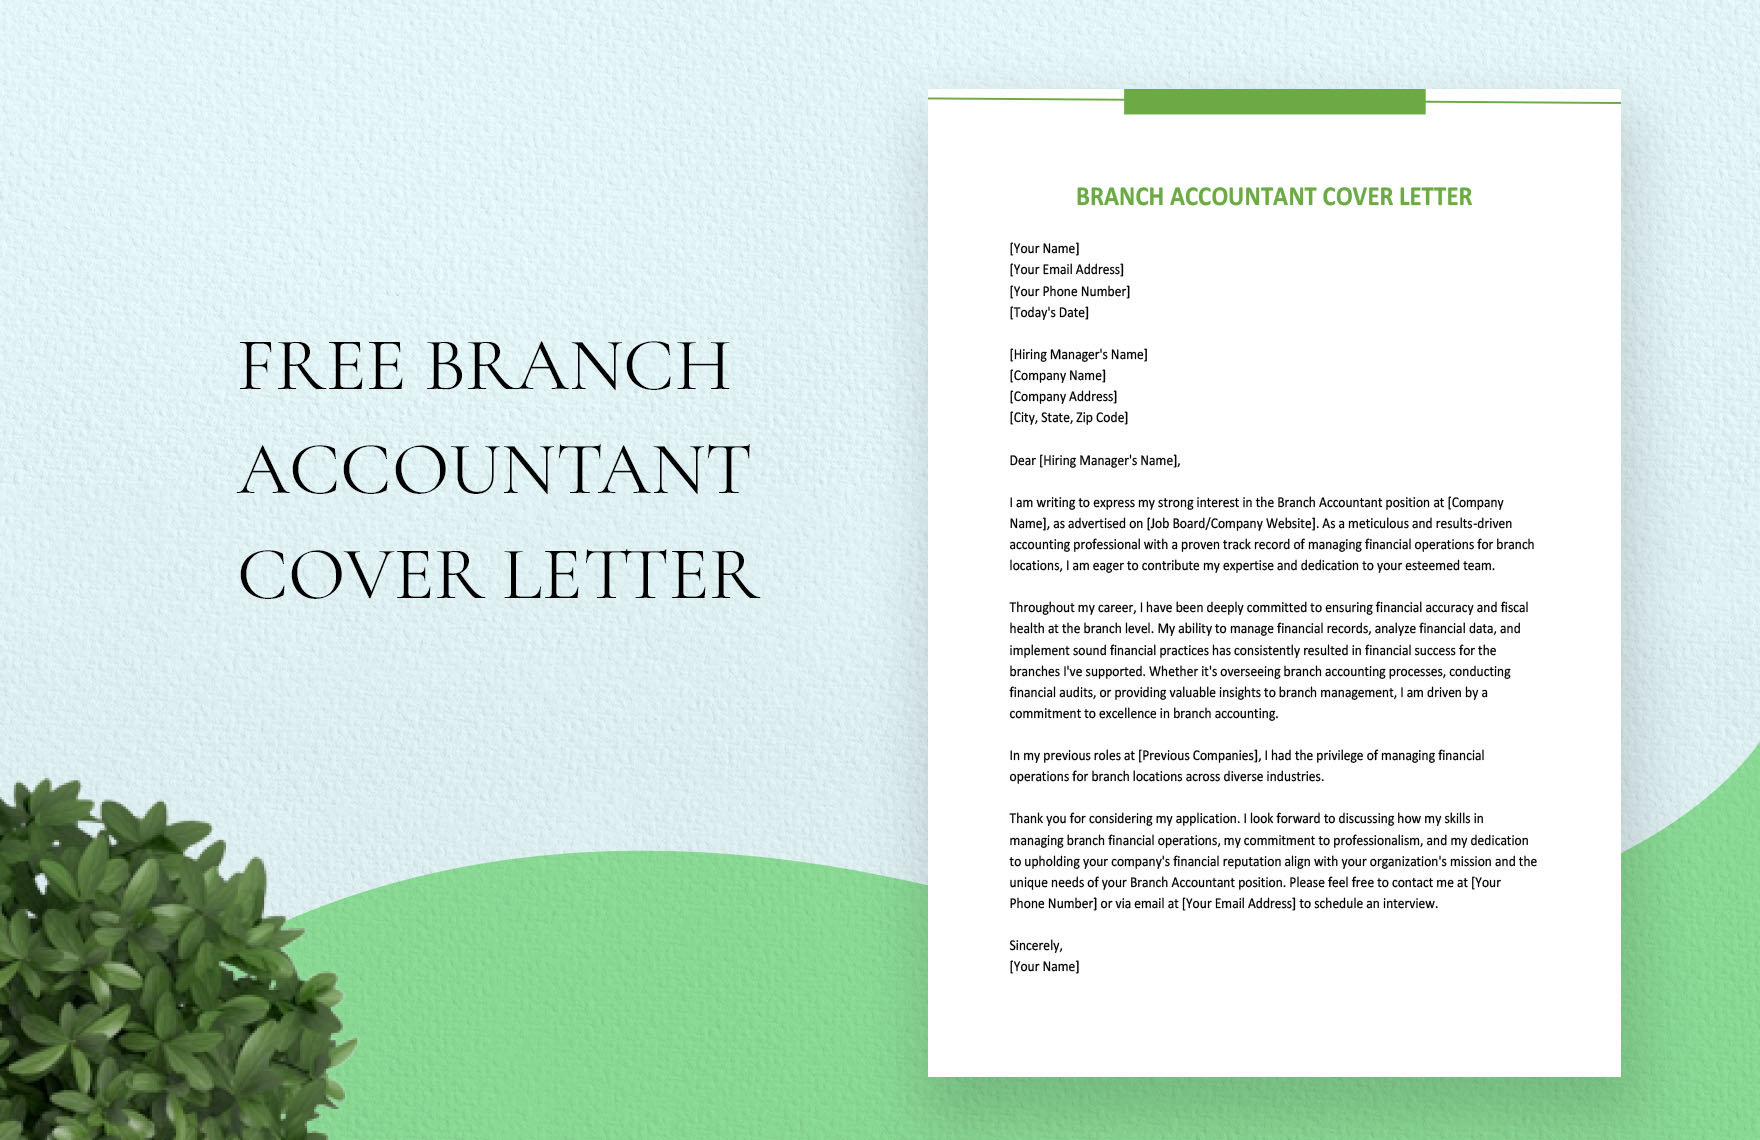 Branch Accountant Cover Letter